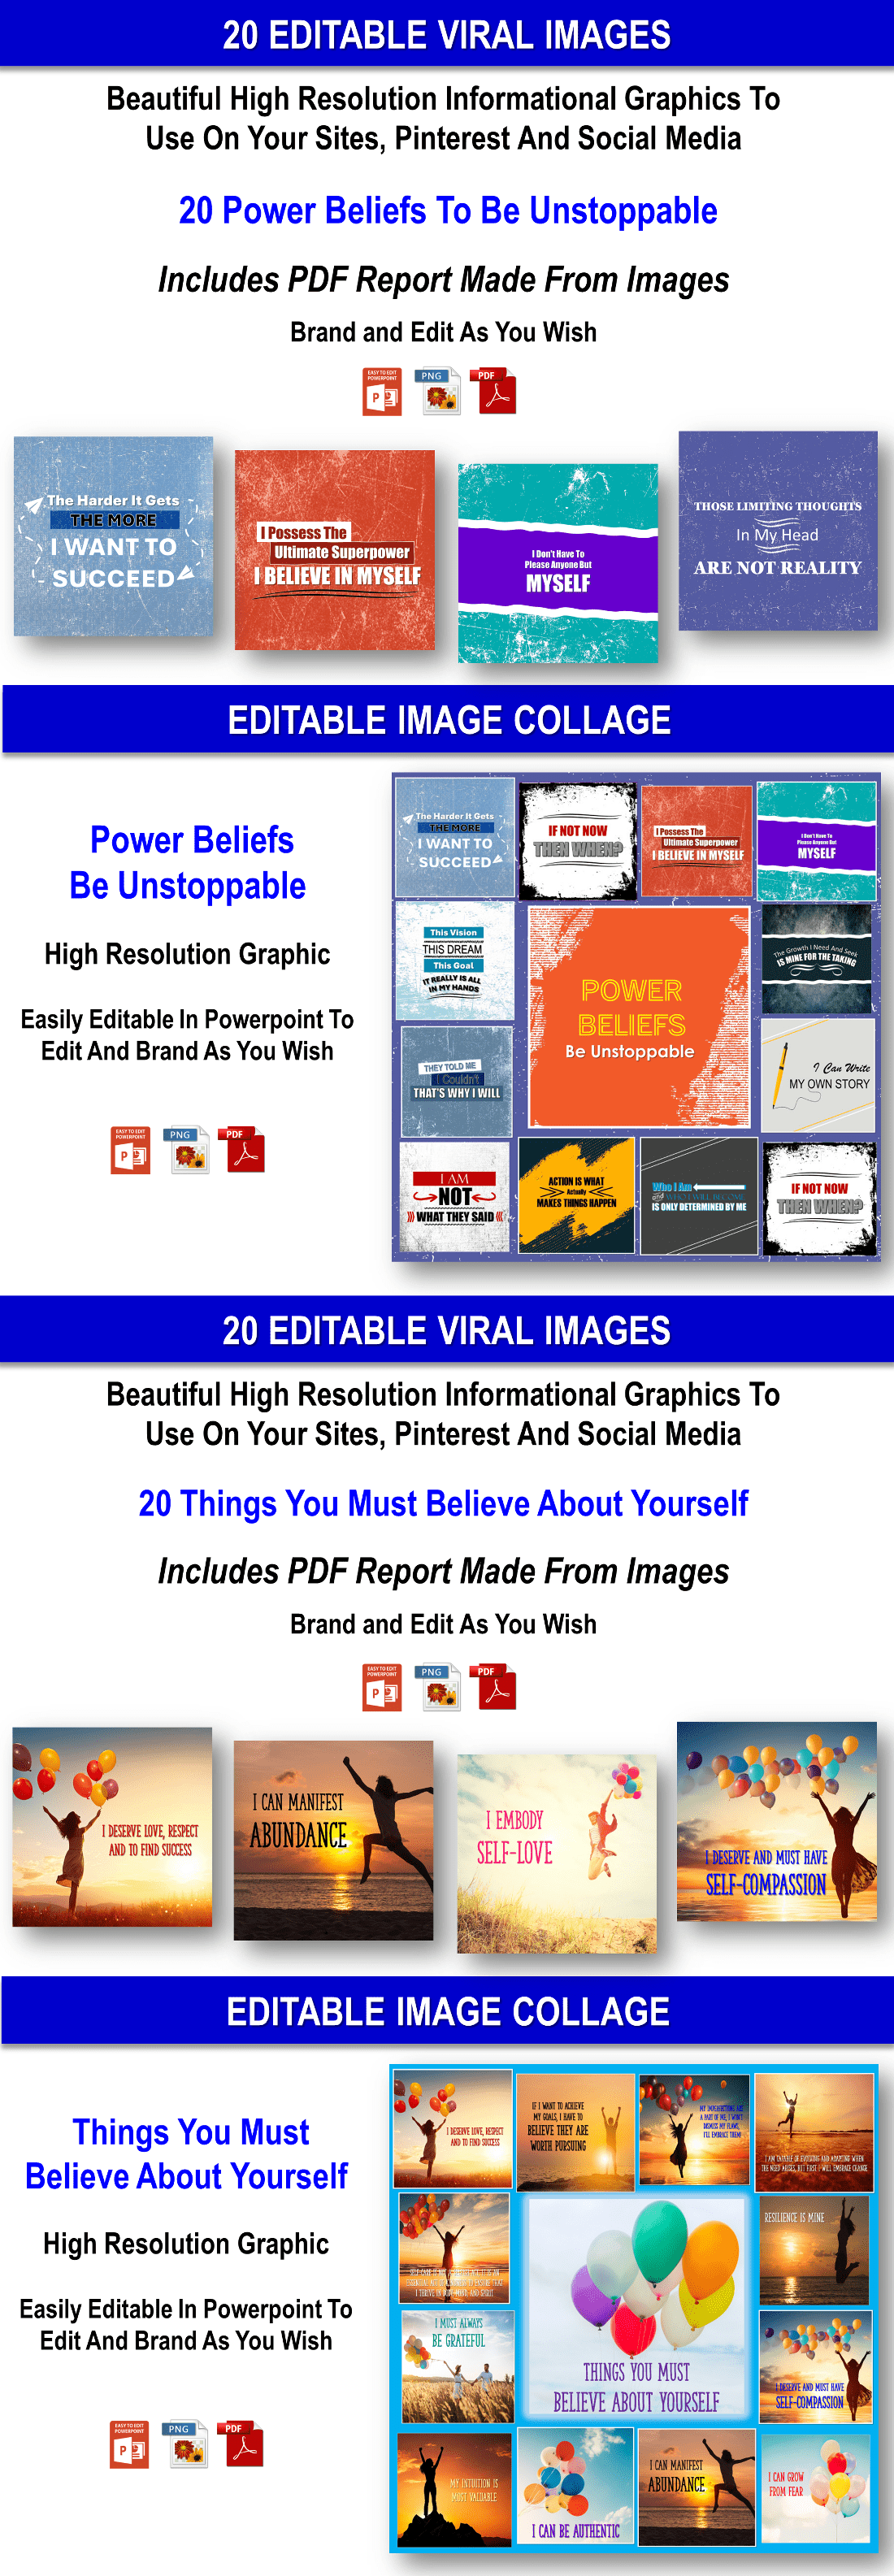 Be Unstoppable - The Power Of Your Beliefs And 20 Strong Beliefs Content Pack - PLR Rights